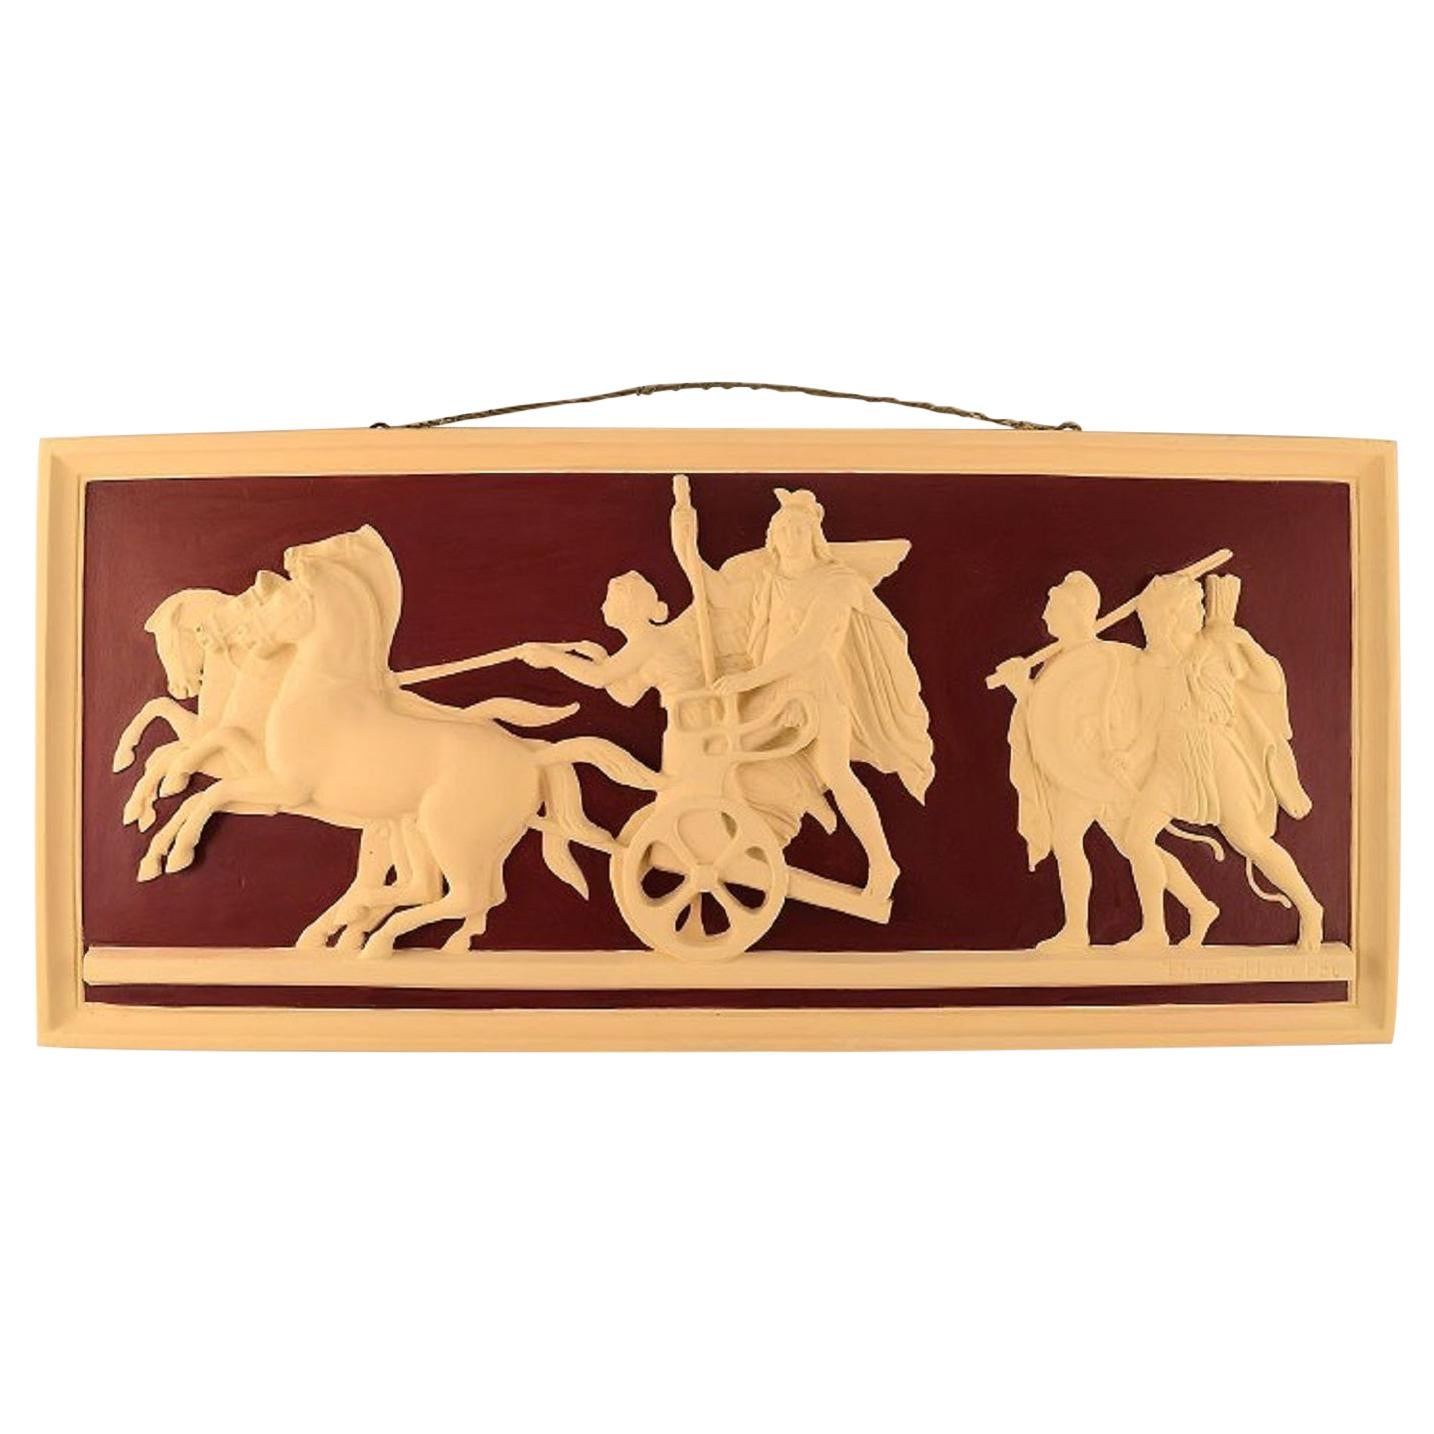 Colossal Plaster Wall Plaque with Motif by Thorvaldsen, Chariot with Four Horses